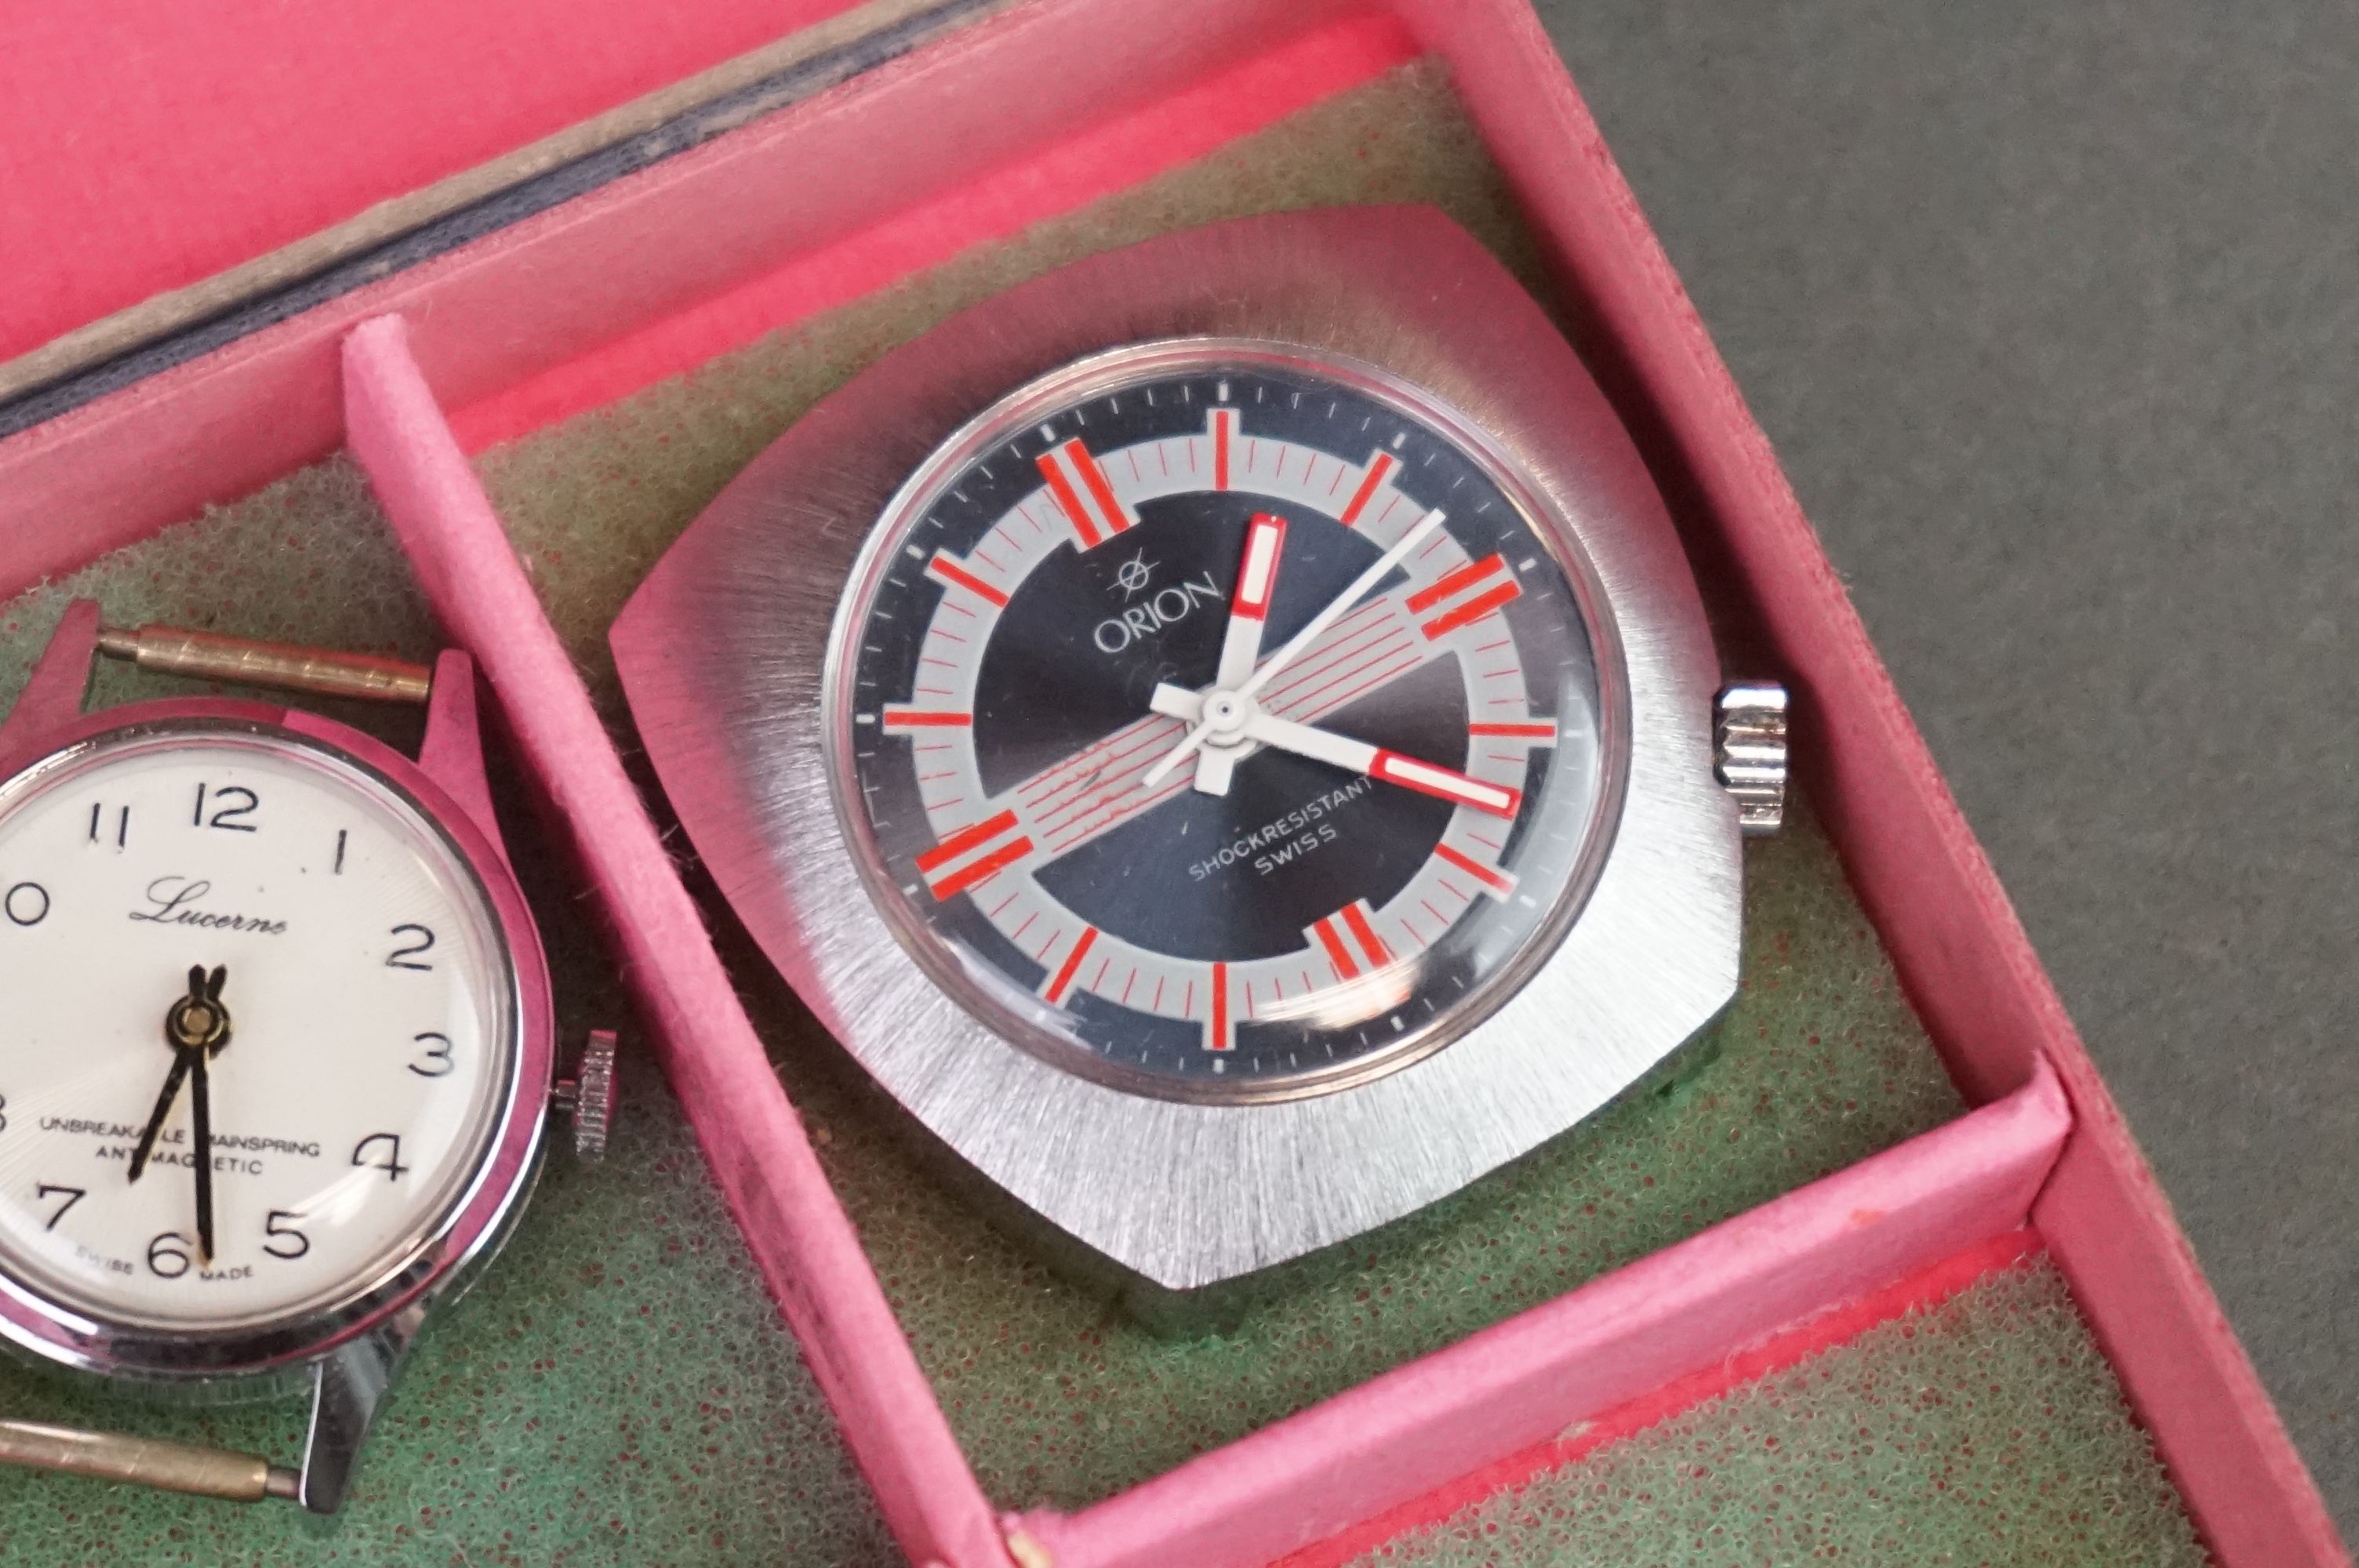 A group of vintage watches to include Eastman, Orion, Avalon, Lucerne and Action Digital. - Image 4 of 4